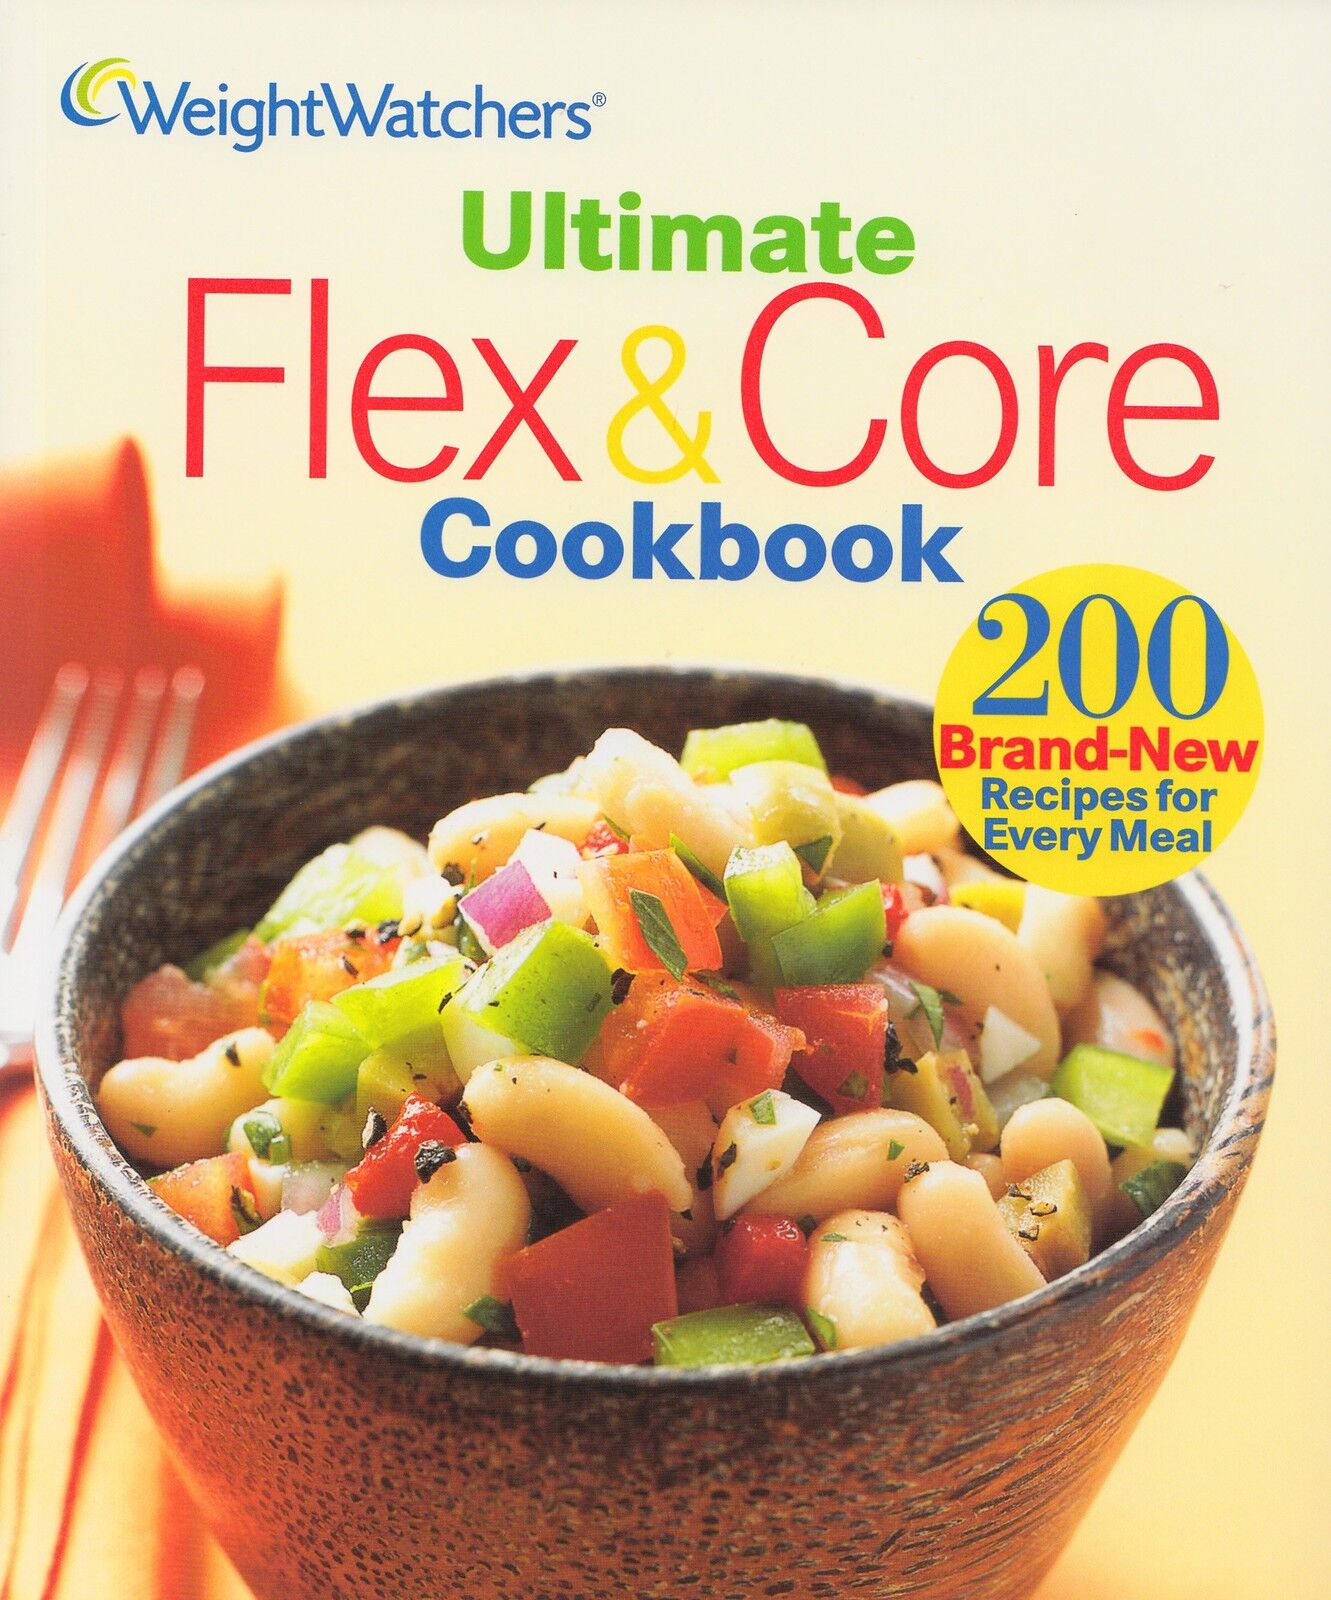 ULTIMATE FLEX & CORE WEIGHT WATCHERS COOKBOOK 200 RECIPES STEAKS, SEAFOOD, SIDES